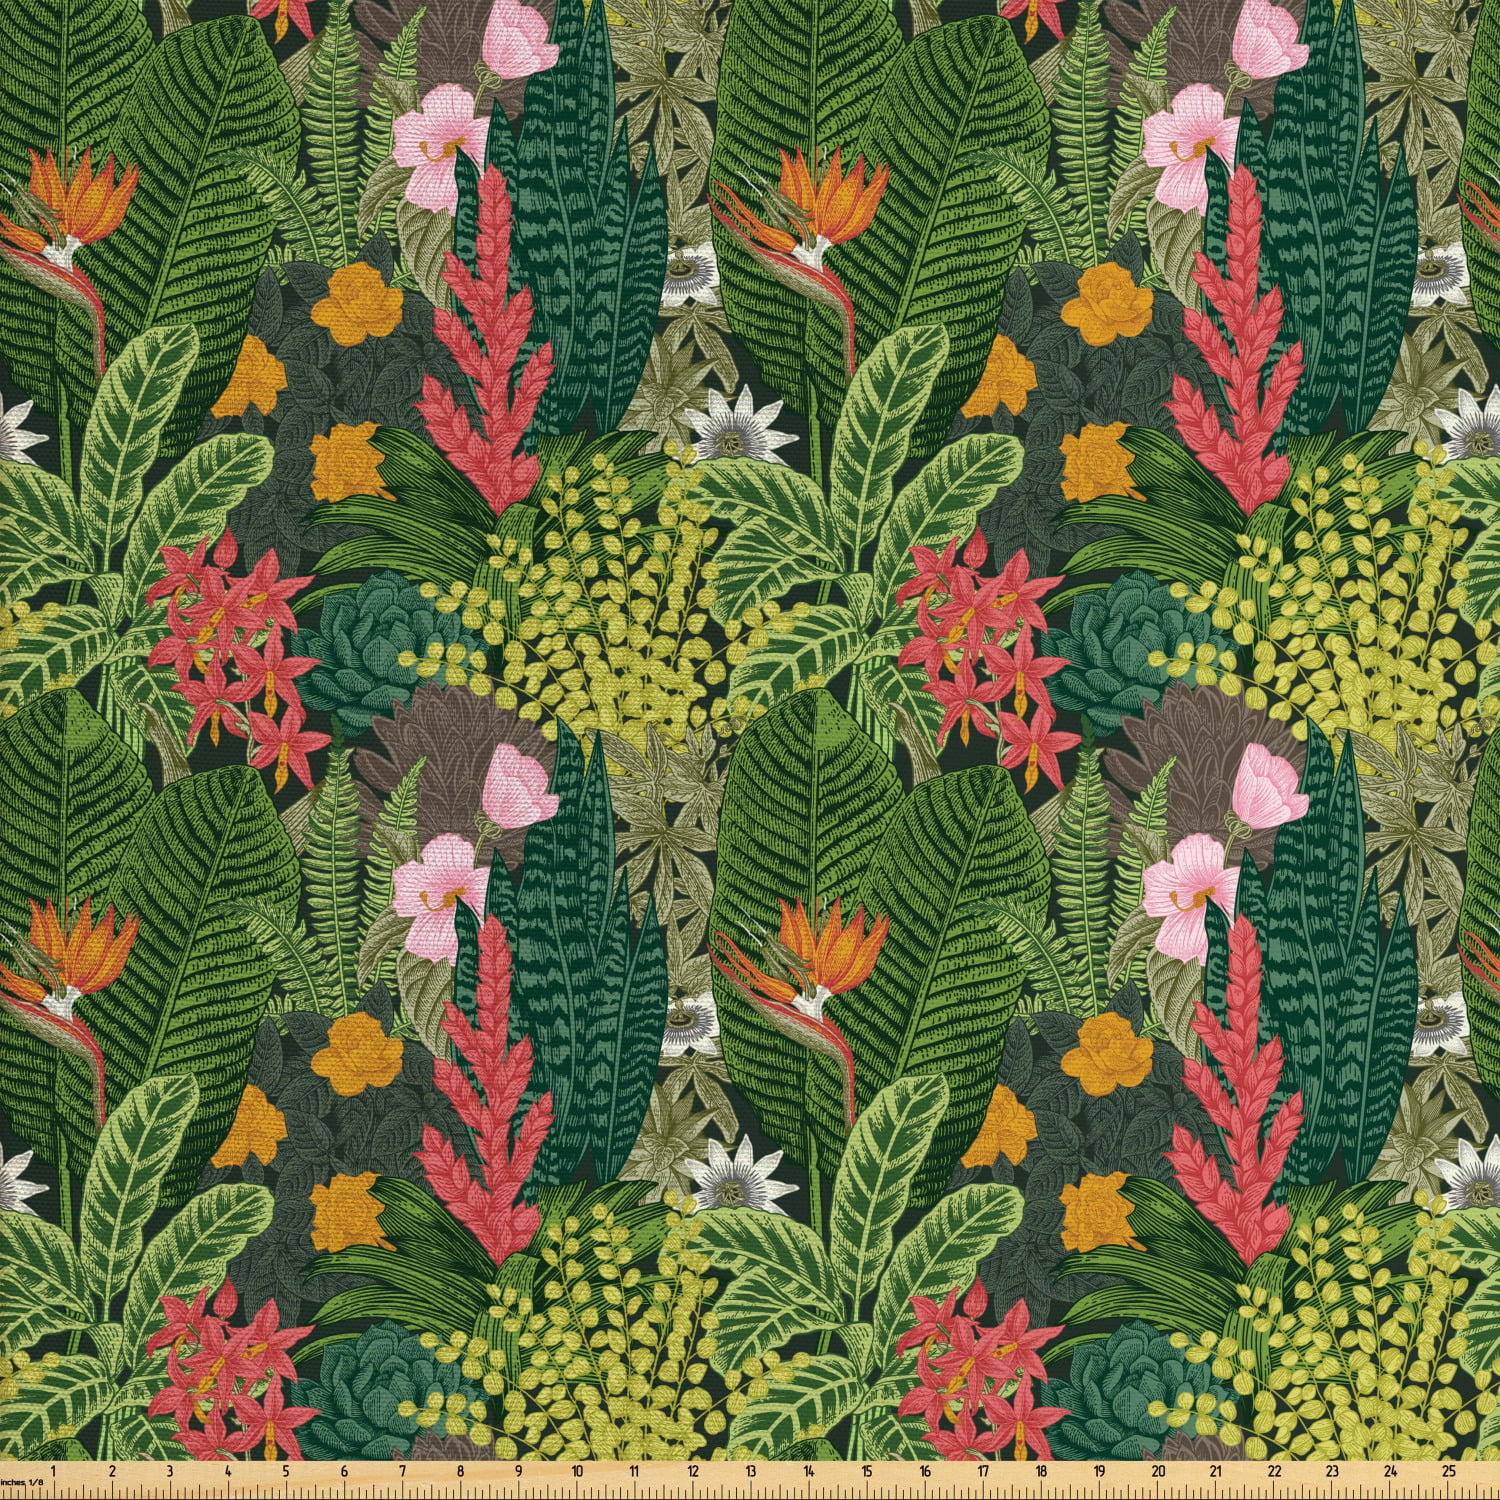 Leaves Fabric by The Yard, Vintage Pattern Classic Botanical Blossom ...